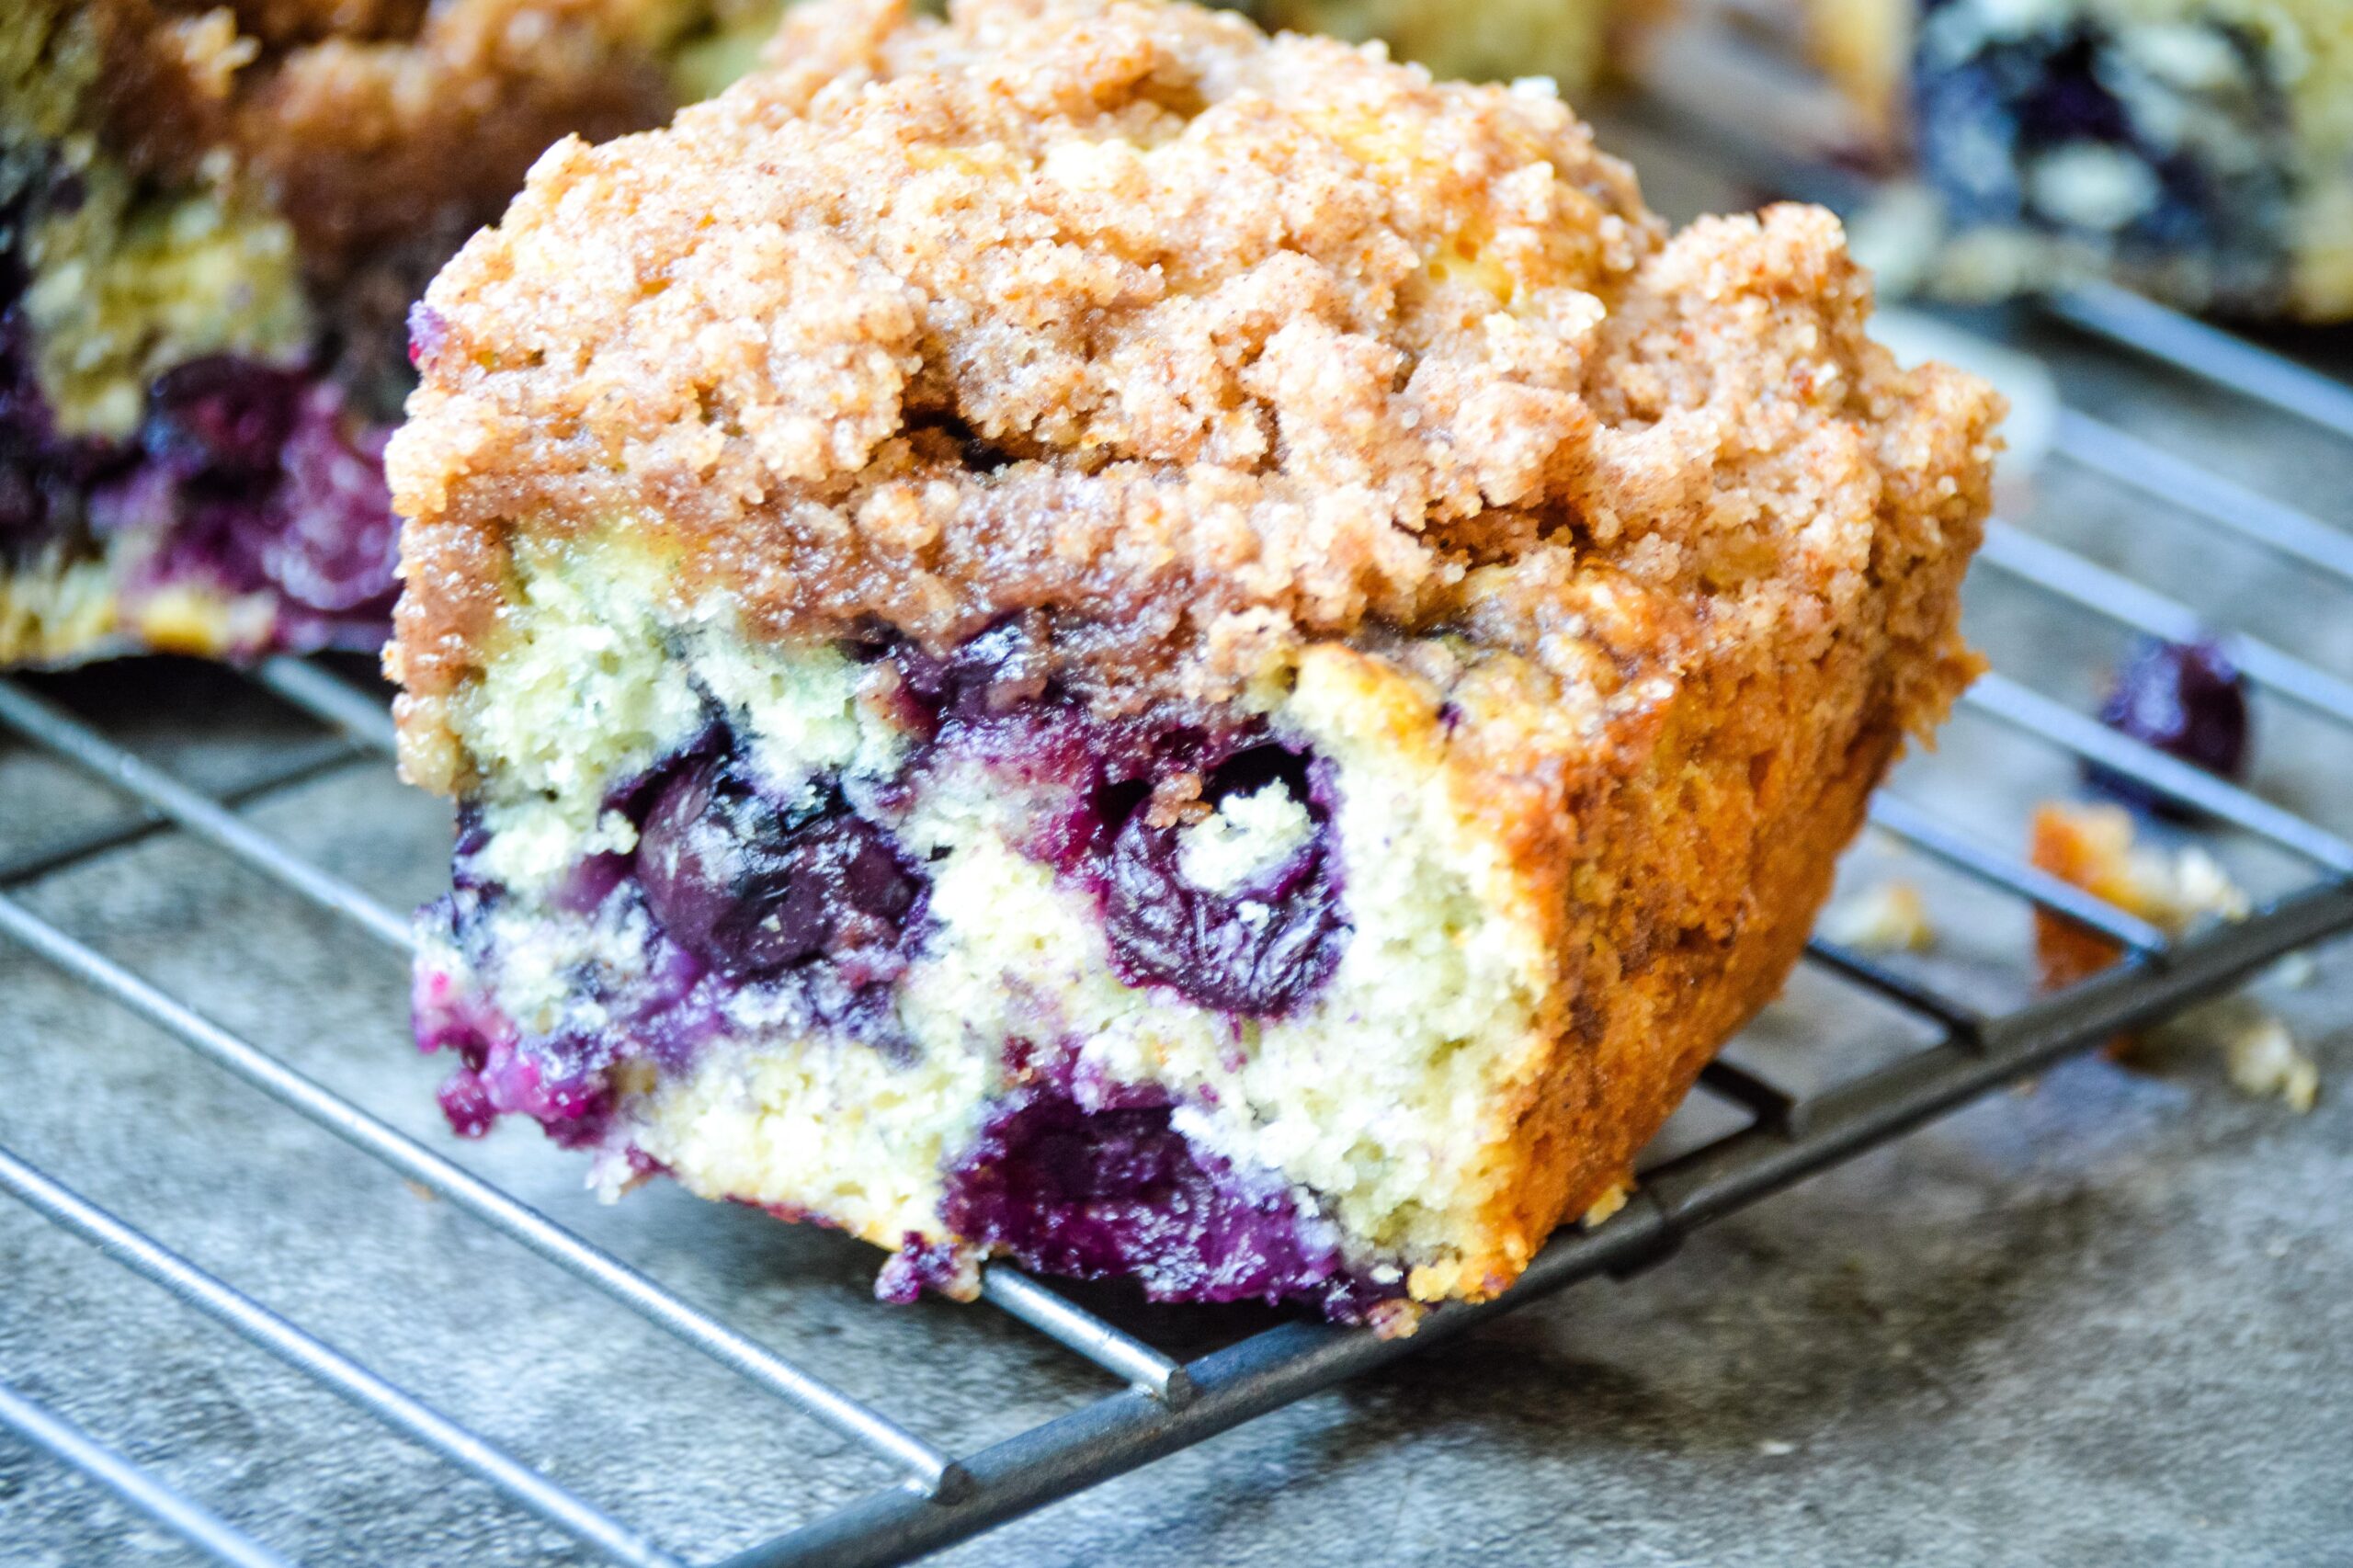  The sweet aroma of fresh blueberries and warm cinnamon will fill your kitchen in no time.